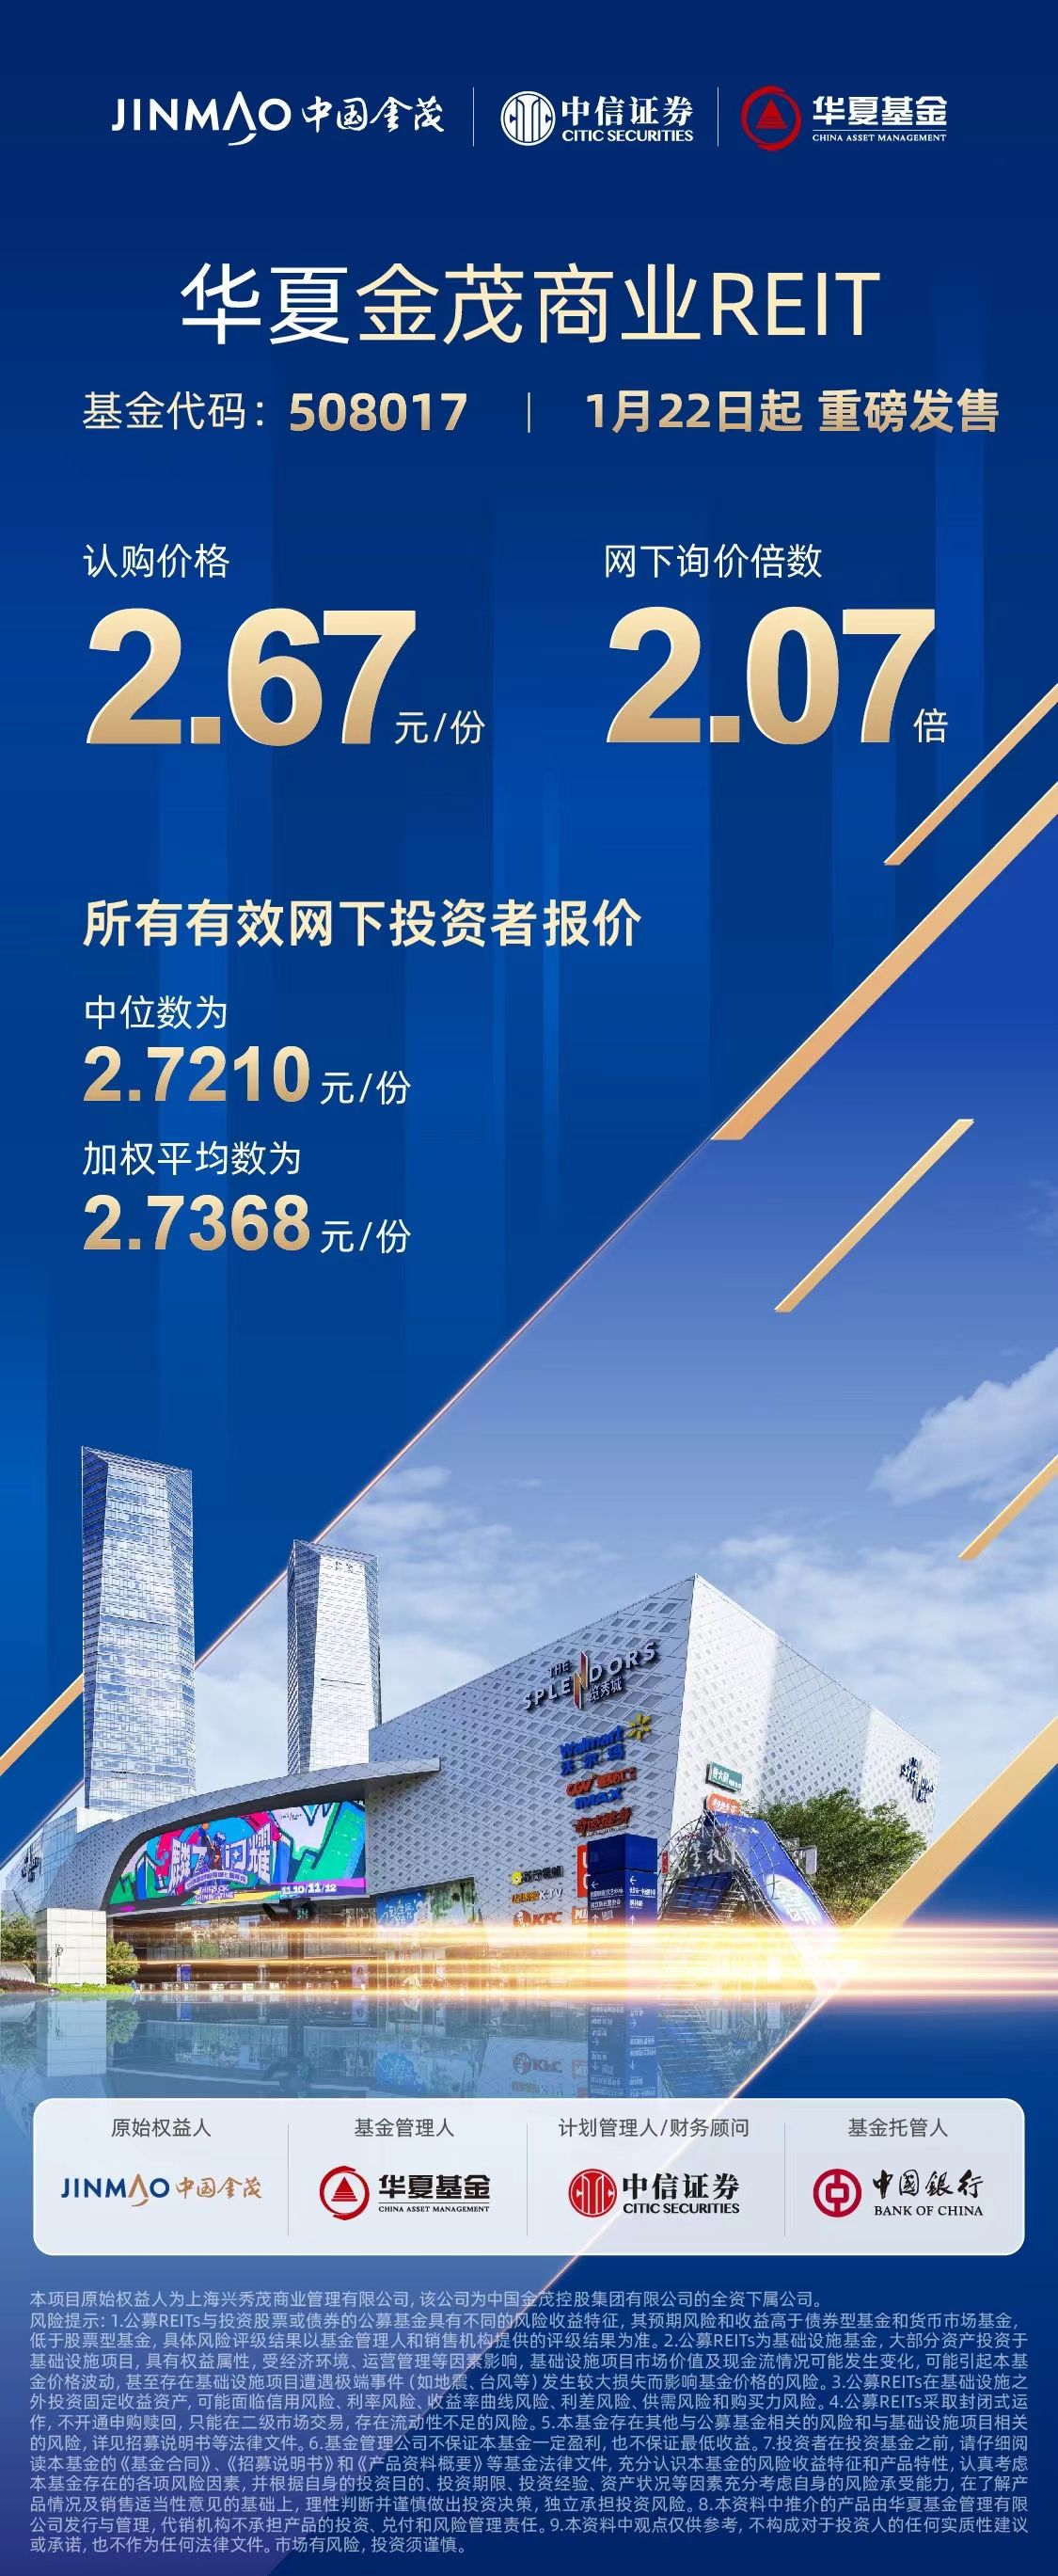 Fixed file on January 22, Huaxia Jinmao Commercial REIT was officially launched